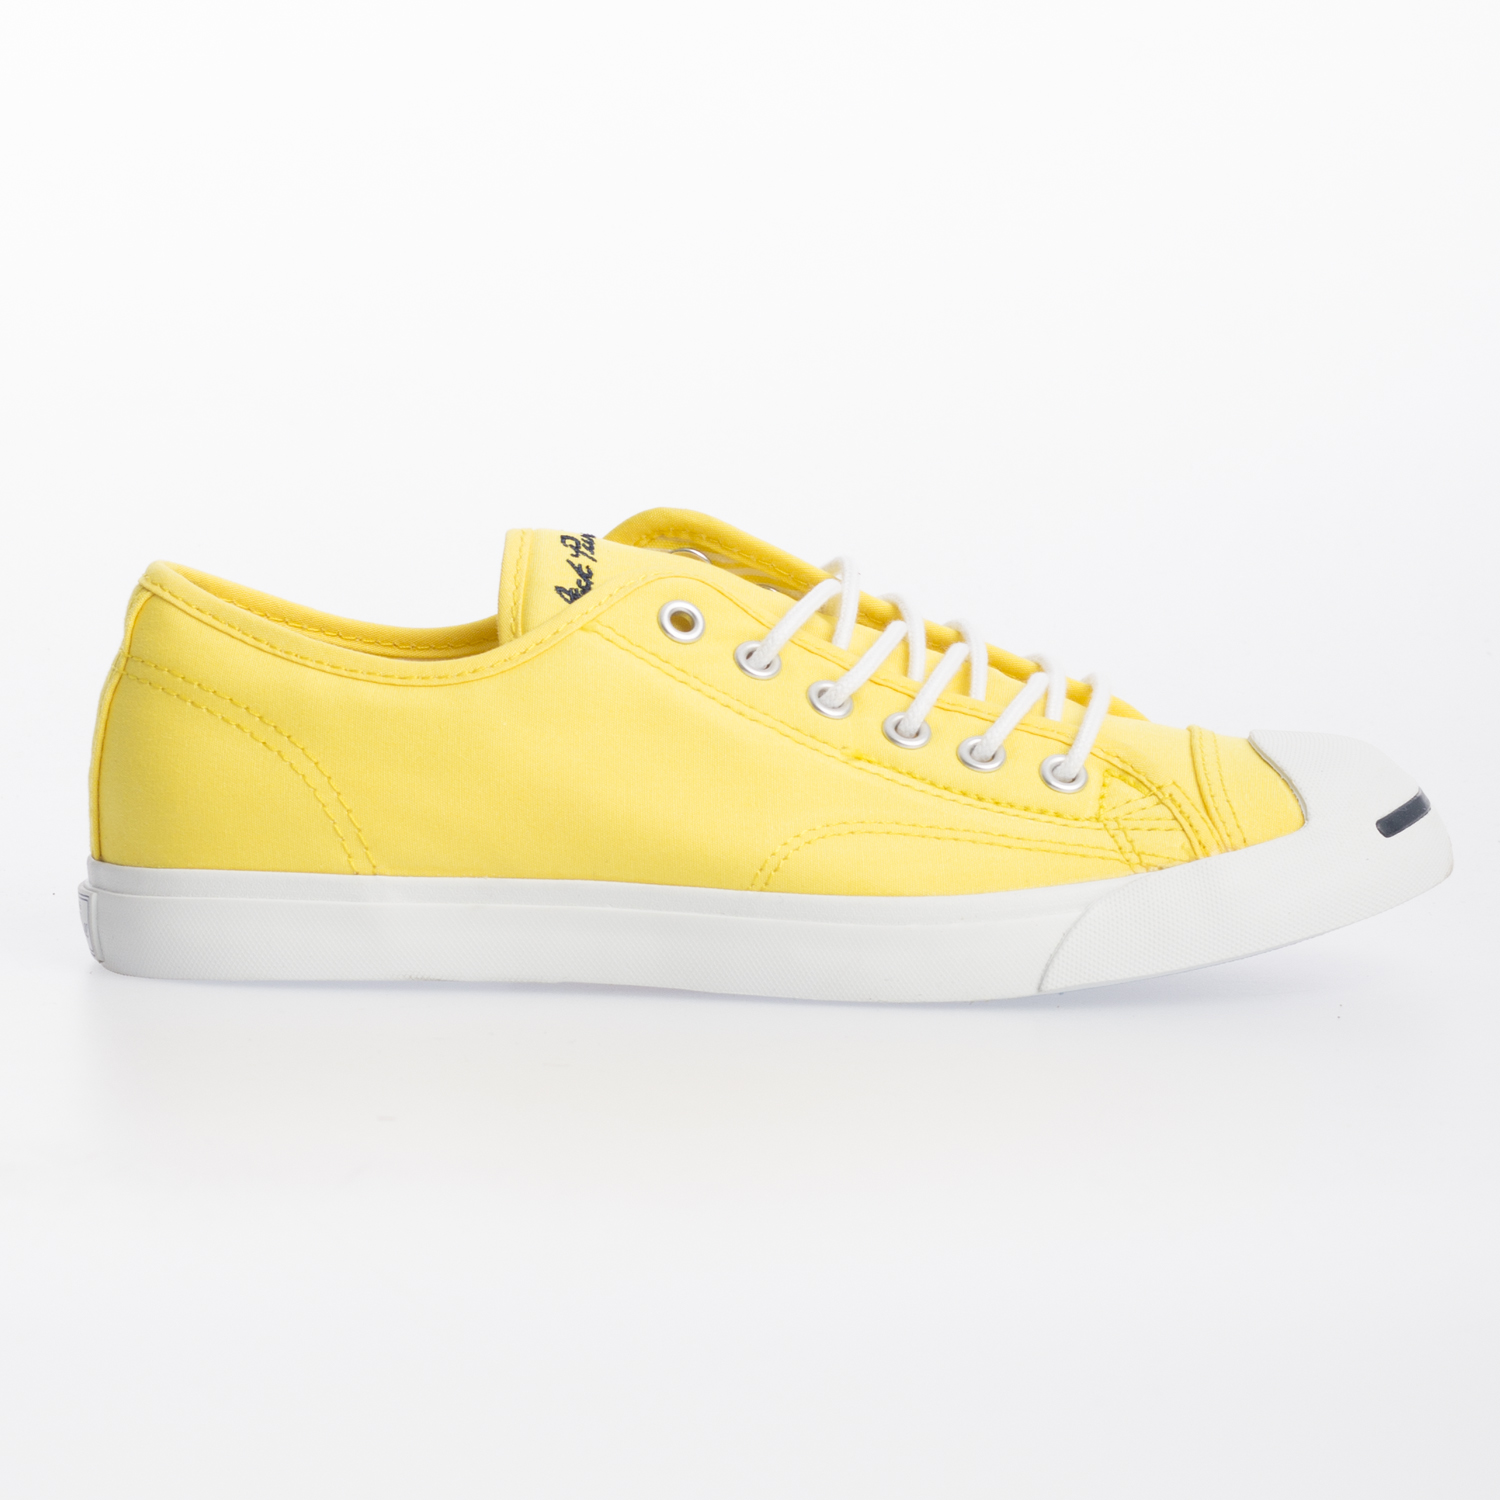 Converse Women Jack Purcell Ox Yellow Lace Up Badminton Size 6 | eBay